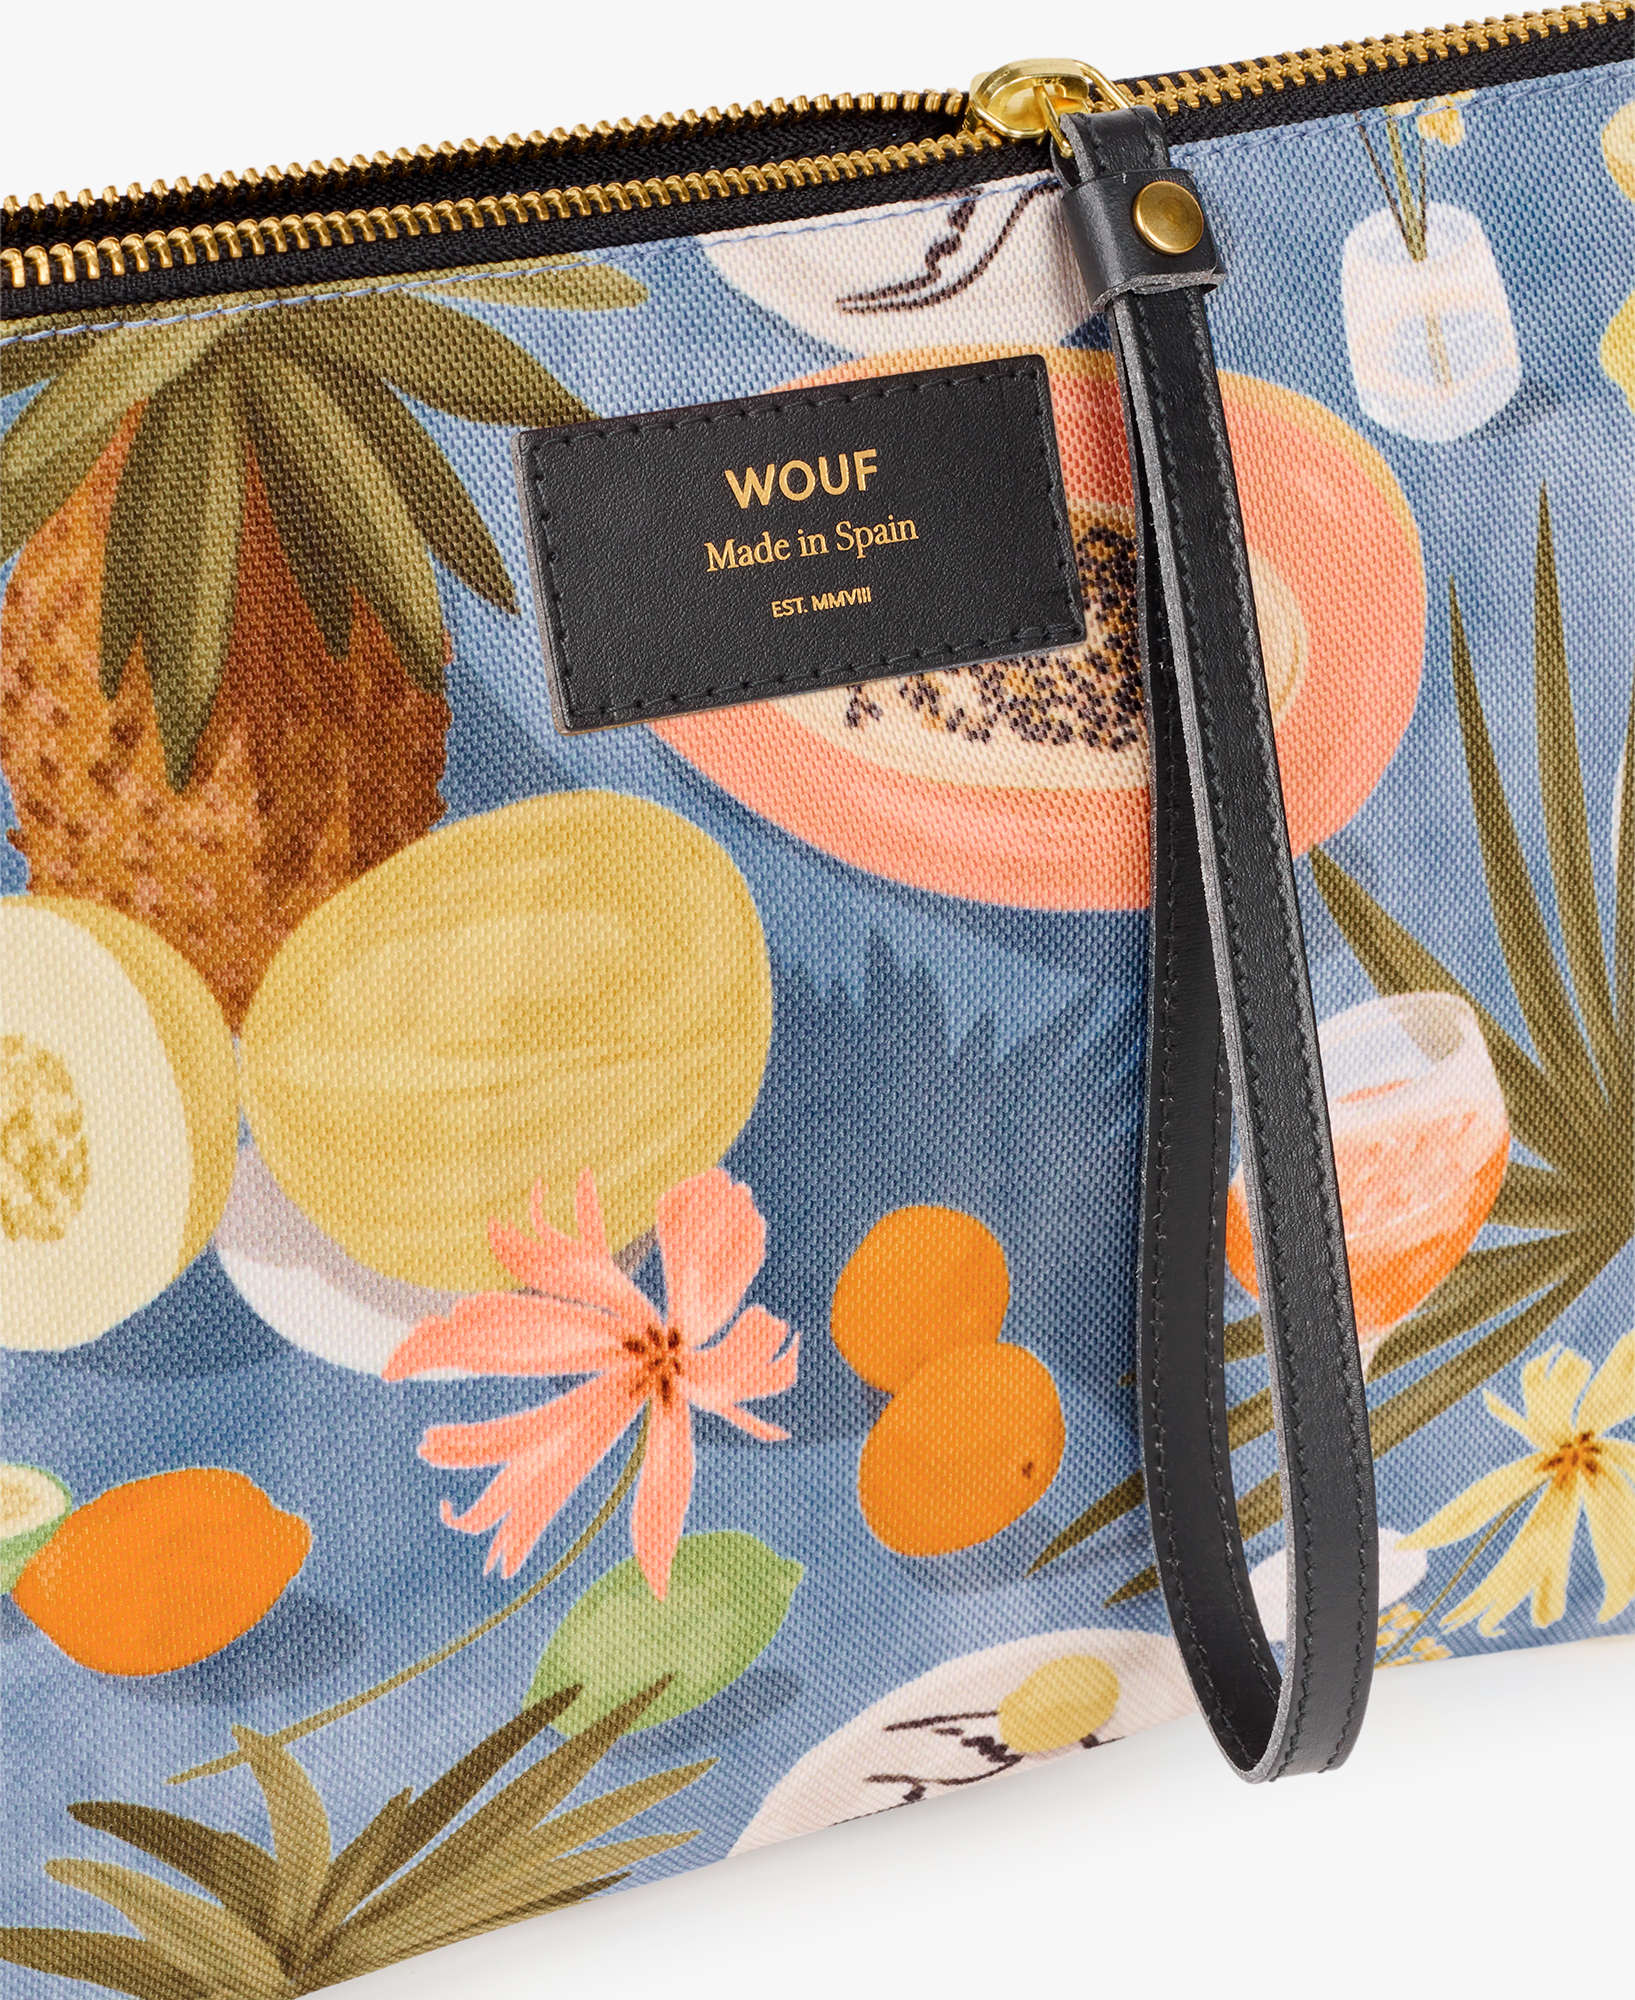 WOUF-XL-Pouch-Cadaques-Label